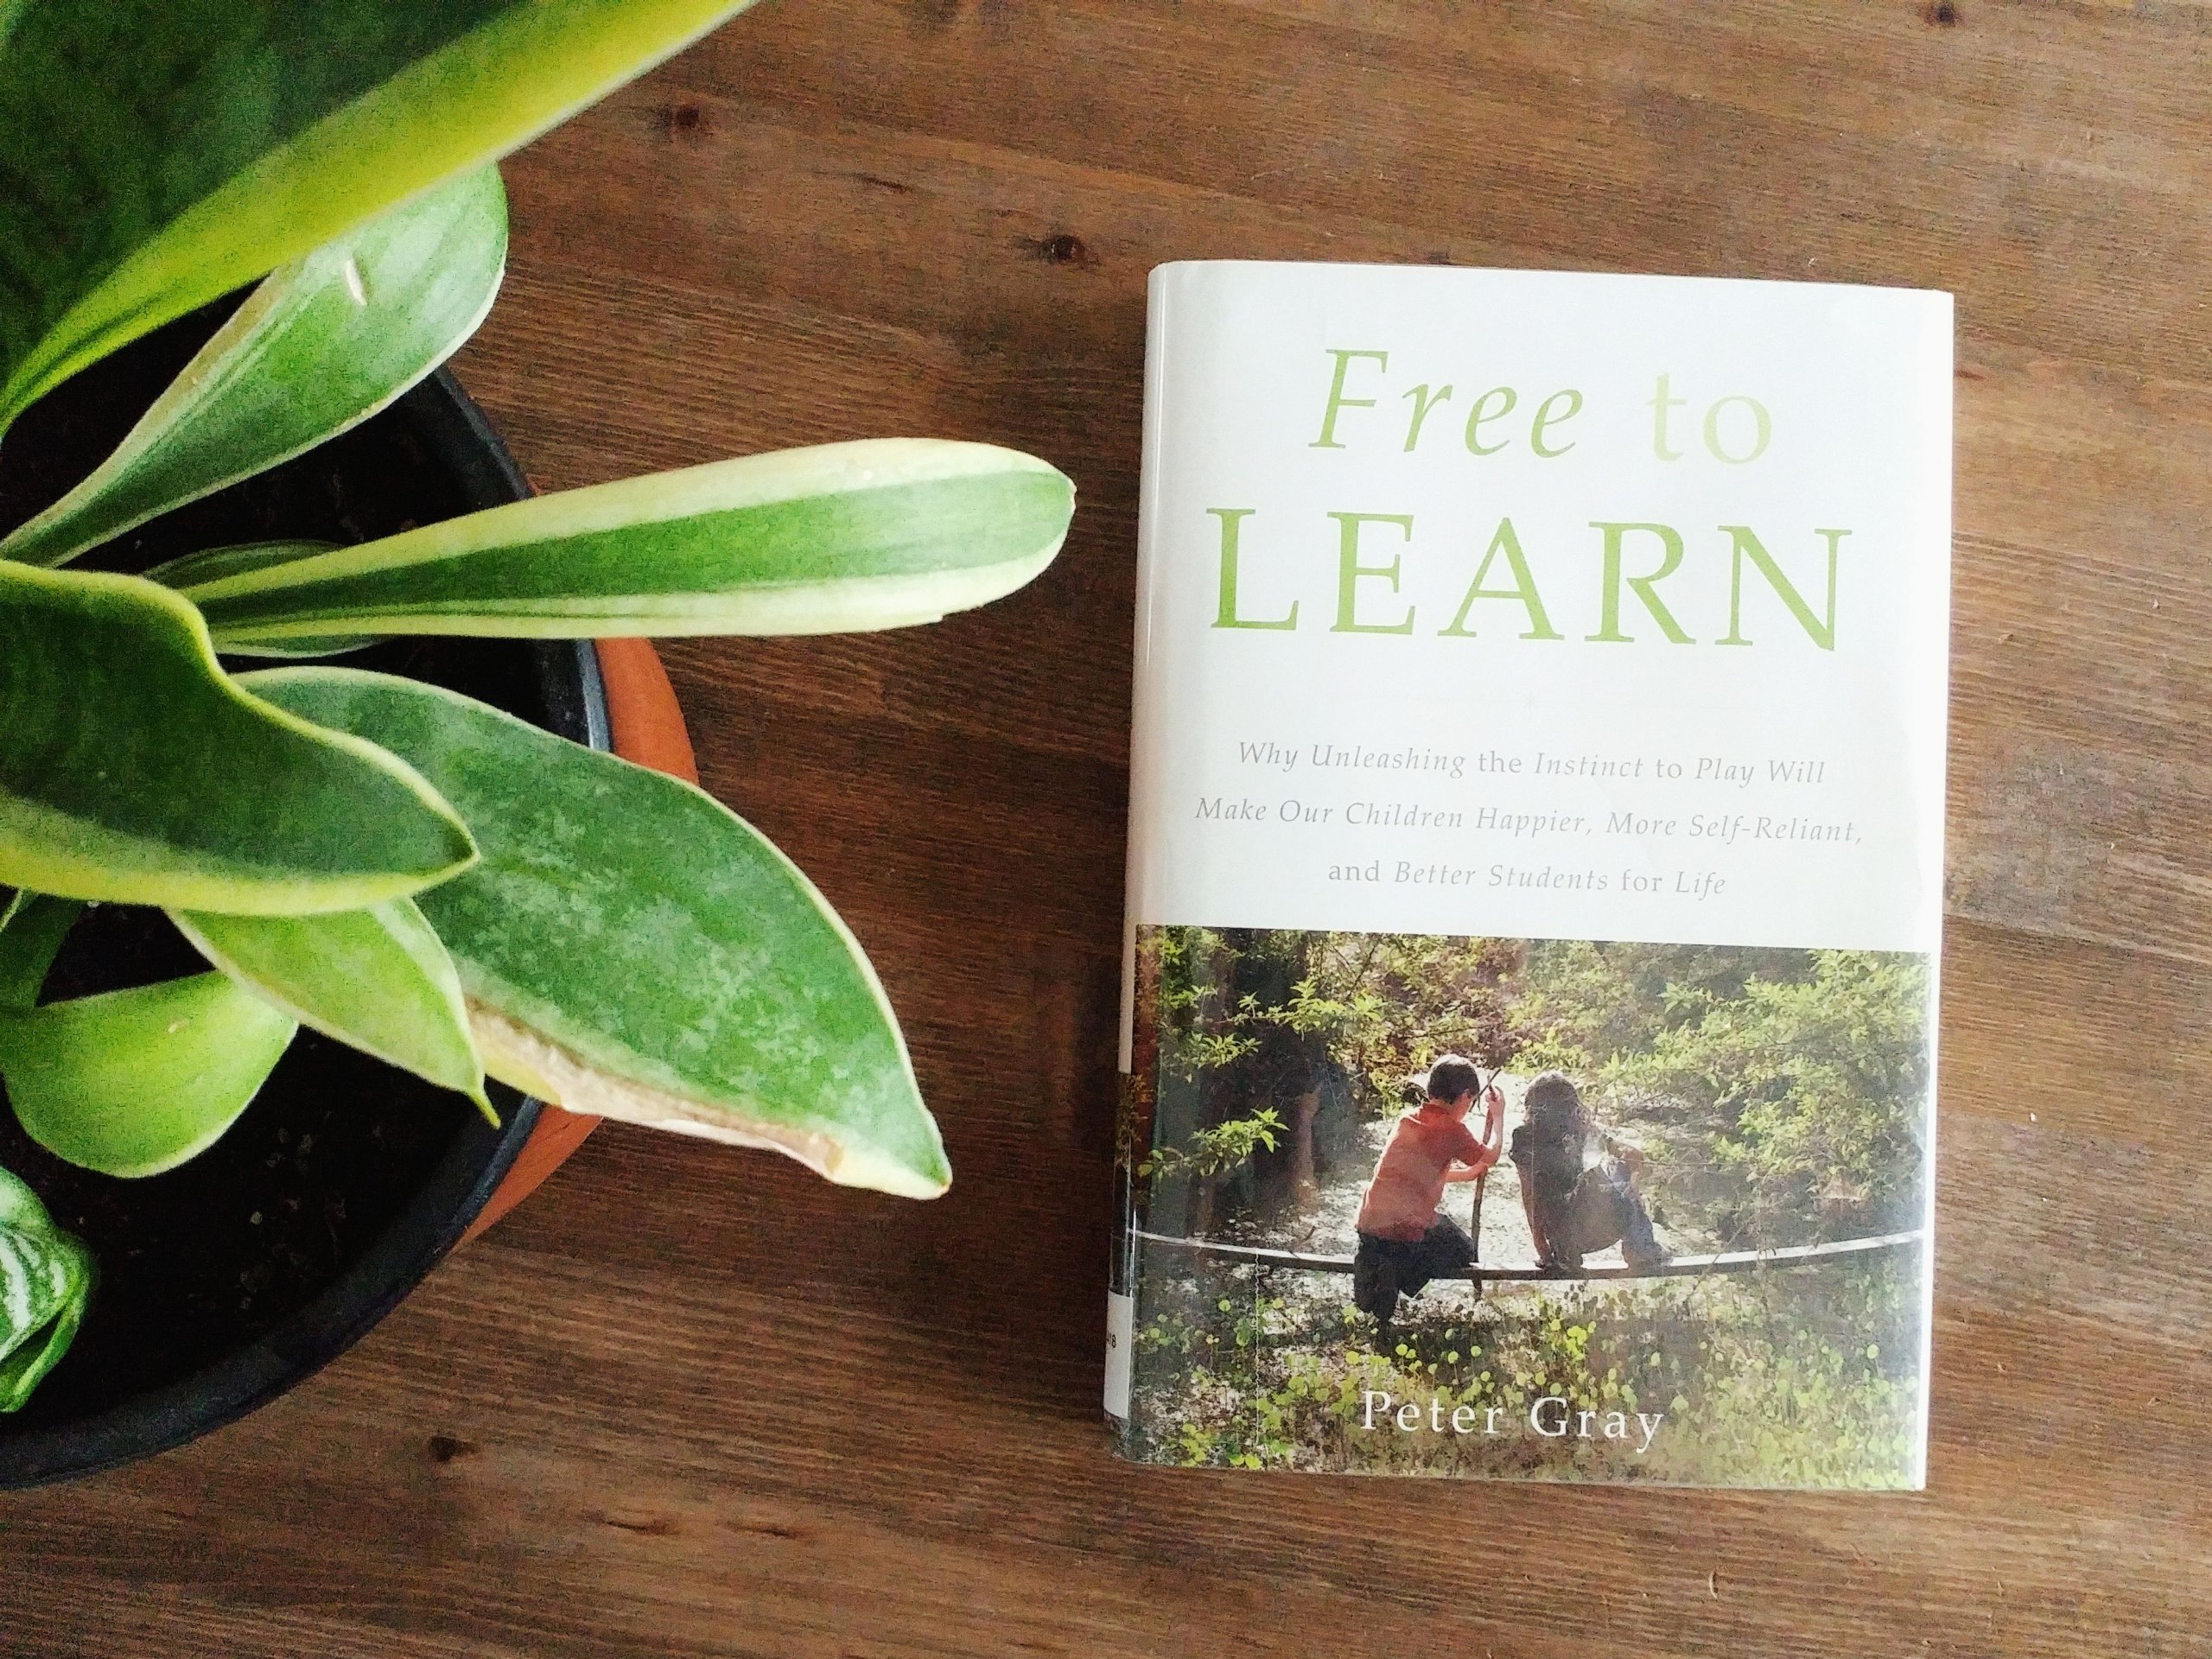 Free to Learn - A Free Book Club for Homeschooling Moms!